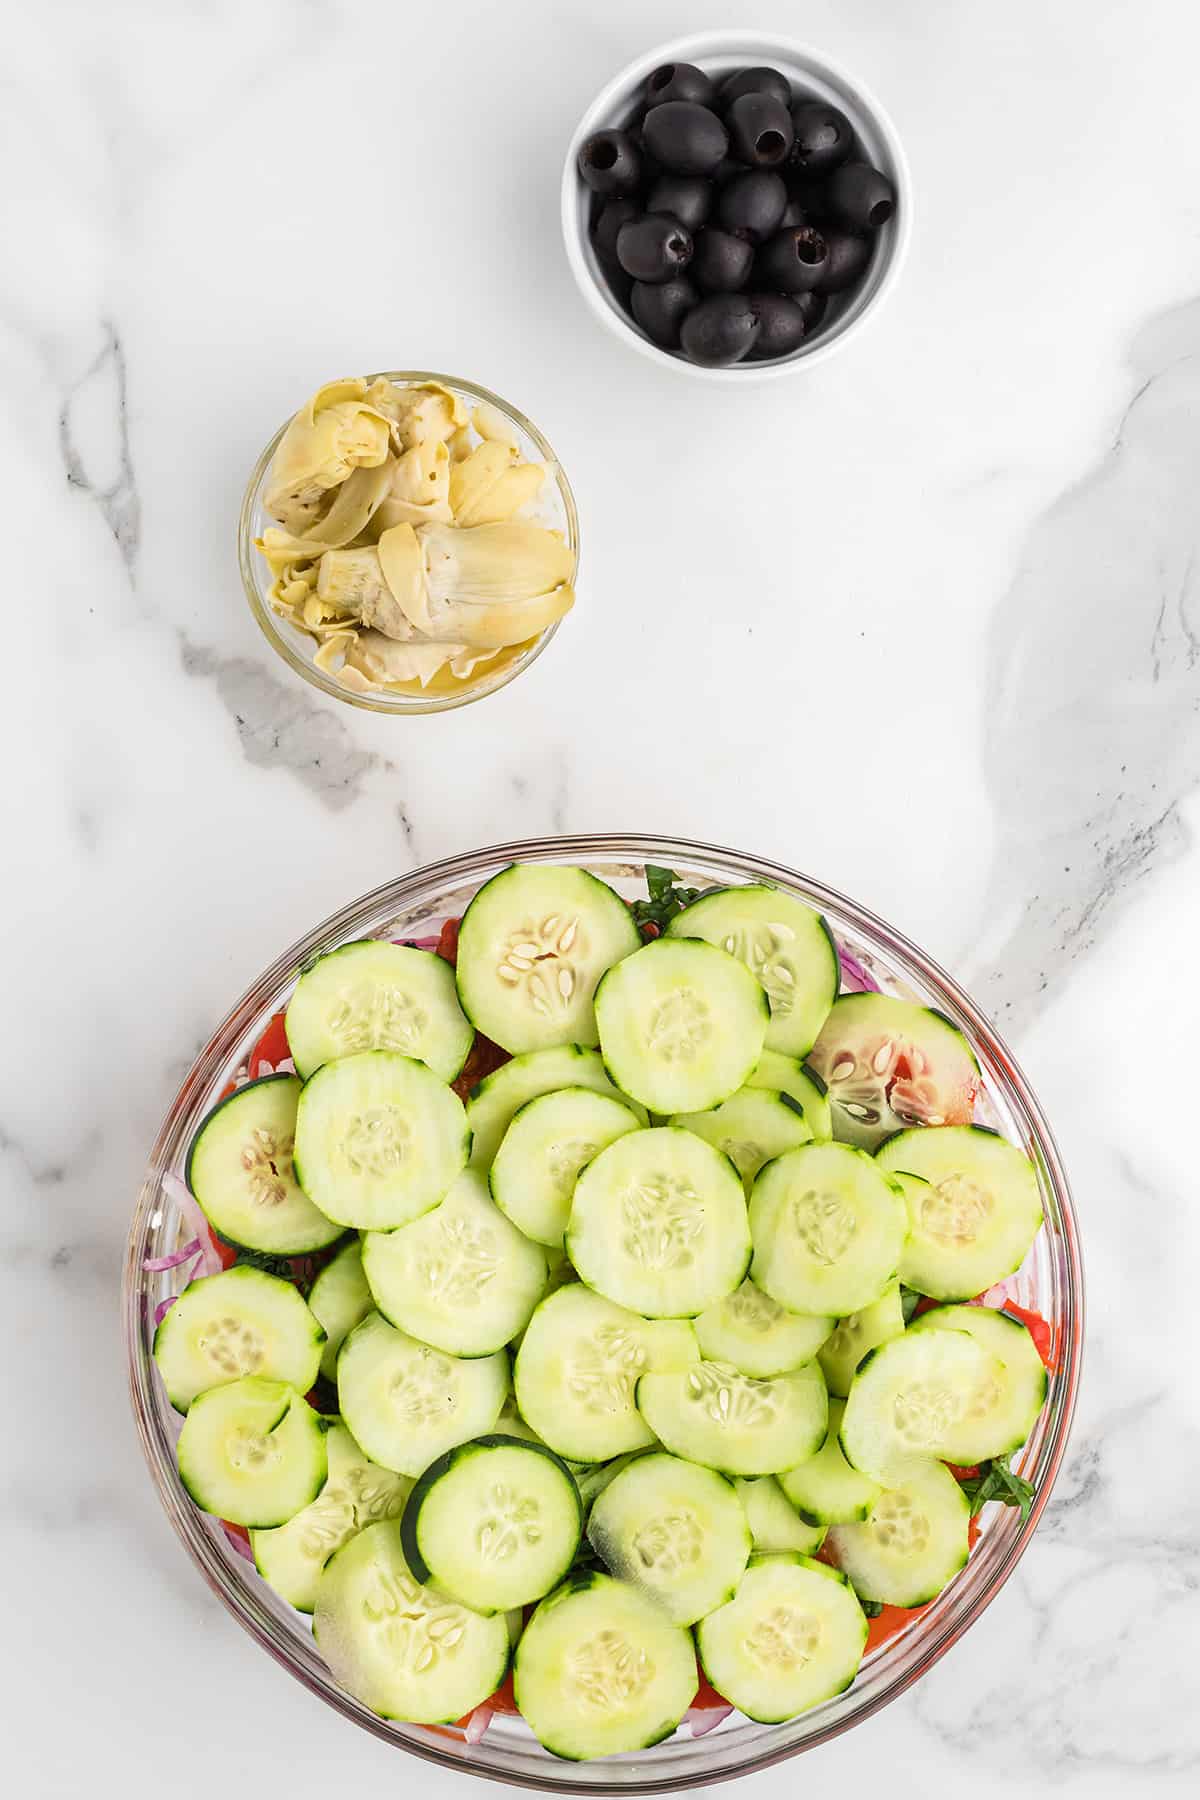 Sliced cucumbers layered into the salad bowl.